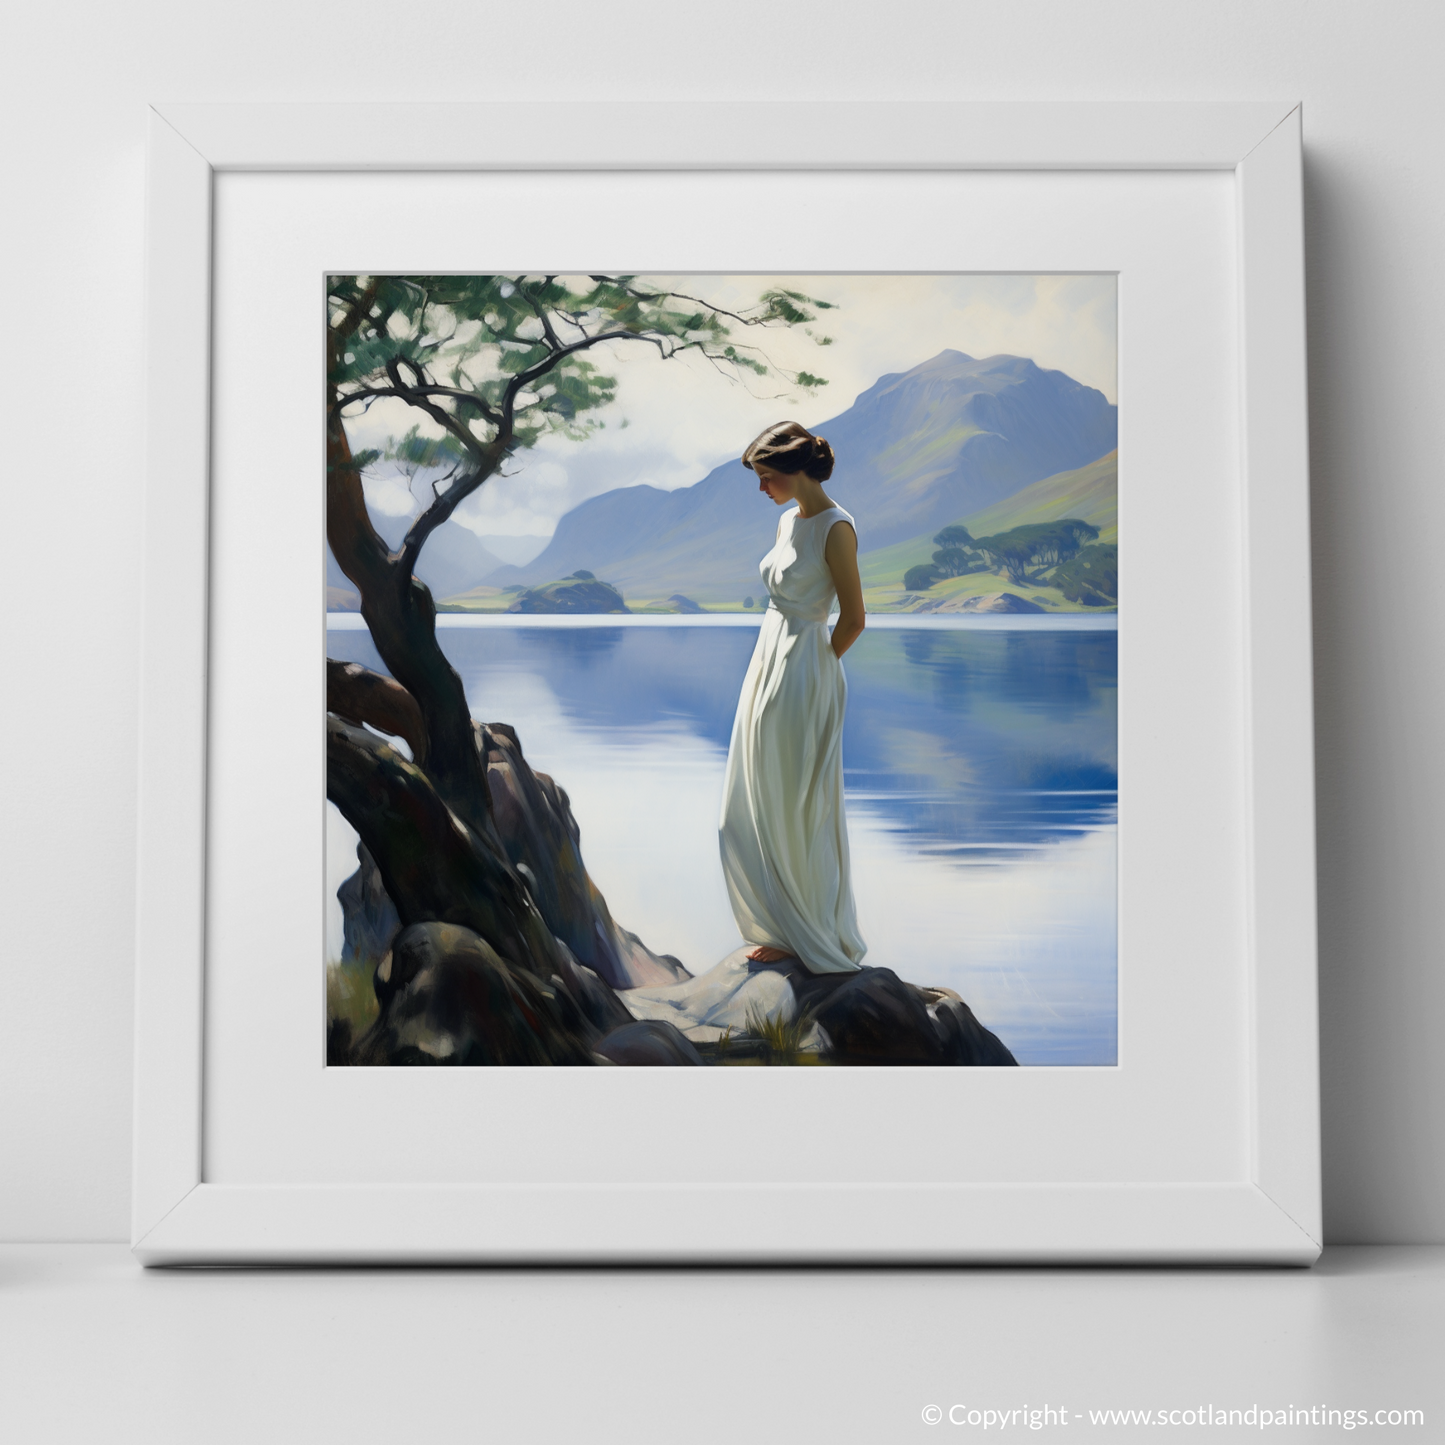 Serenity by Loch Maree: A Portrait of Elegance in White